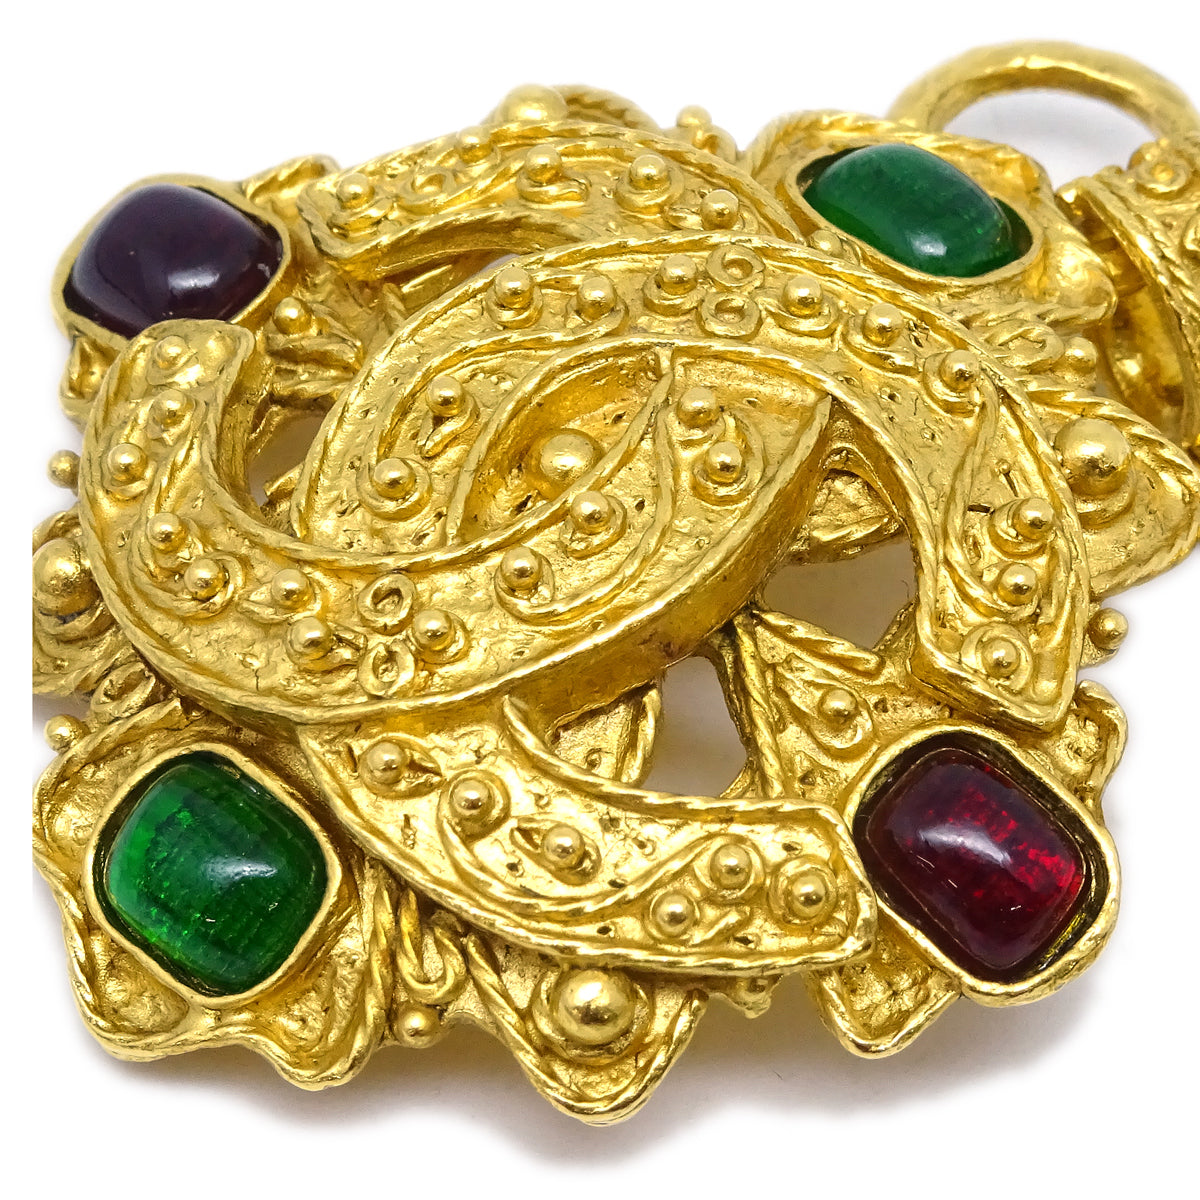 Chanel Gripoix Brooch Pin Gold Green 94A